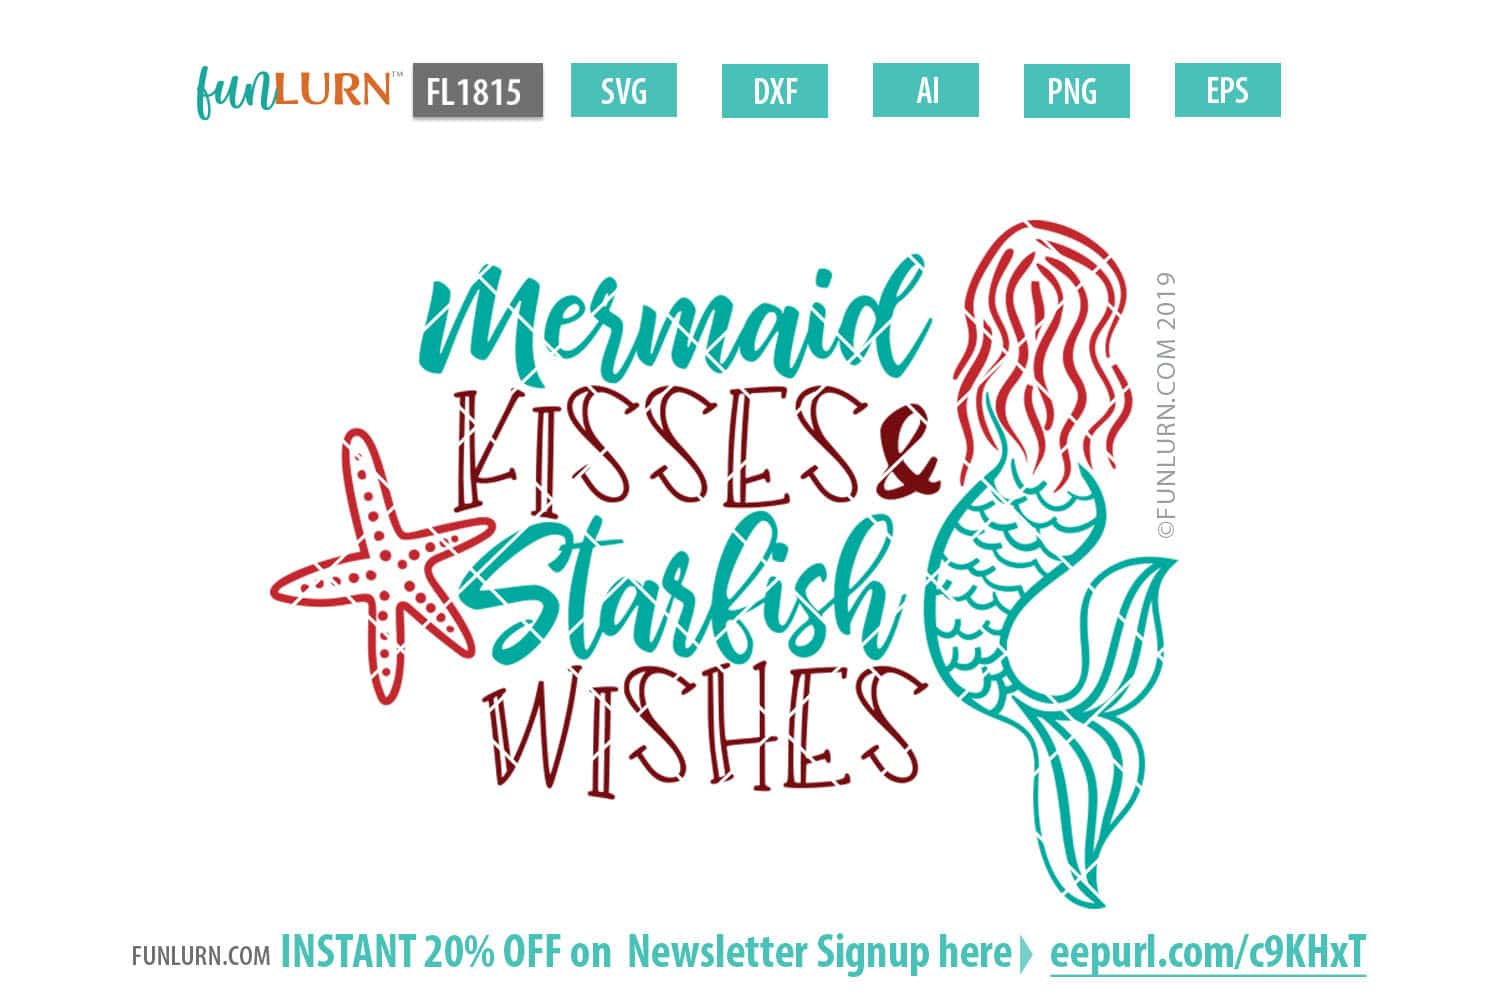 Free Free 104 Mermaid Kisses And Starfish Wishes Svg Free SVG PNG EPS DXF File